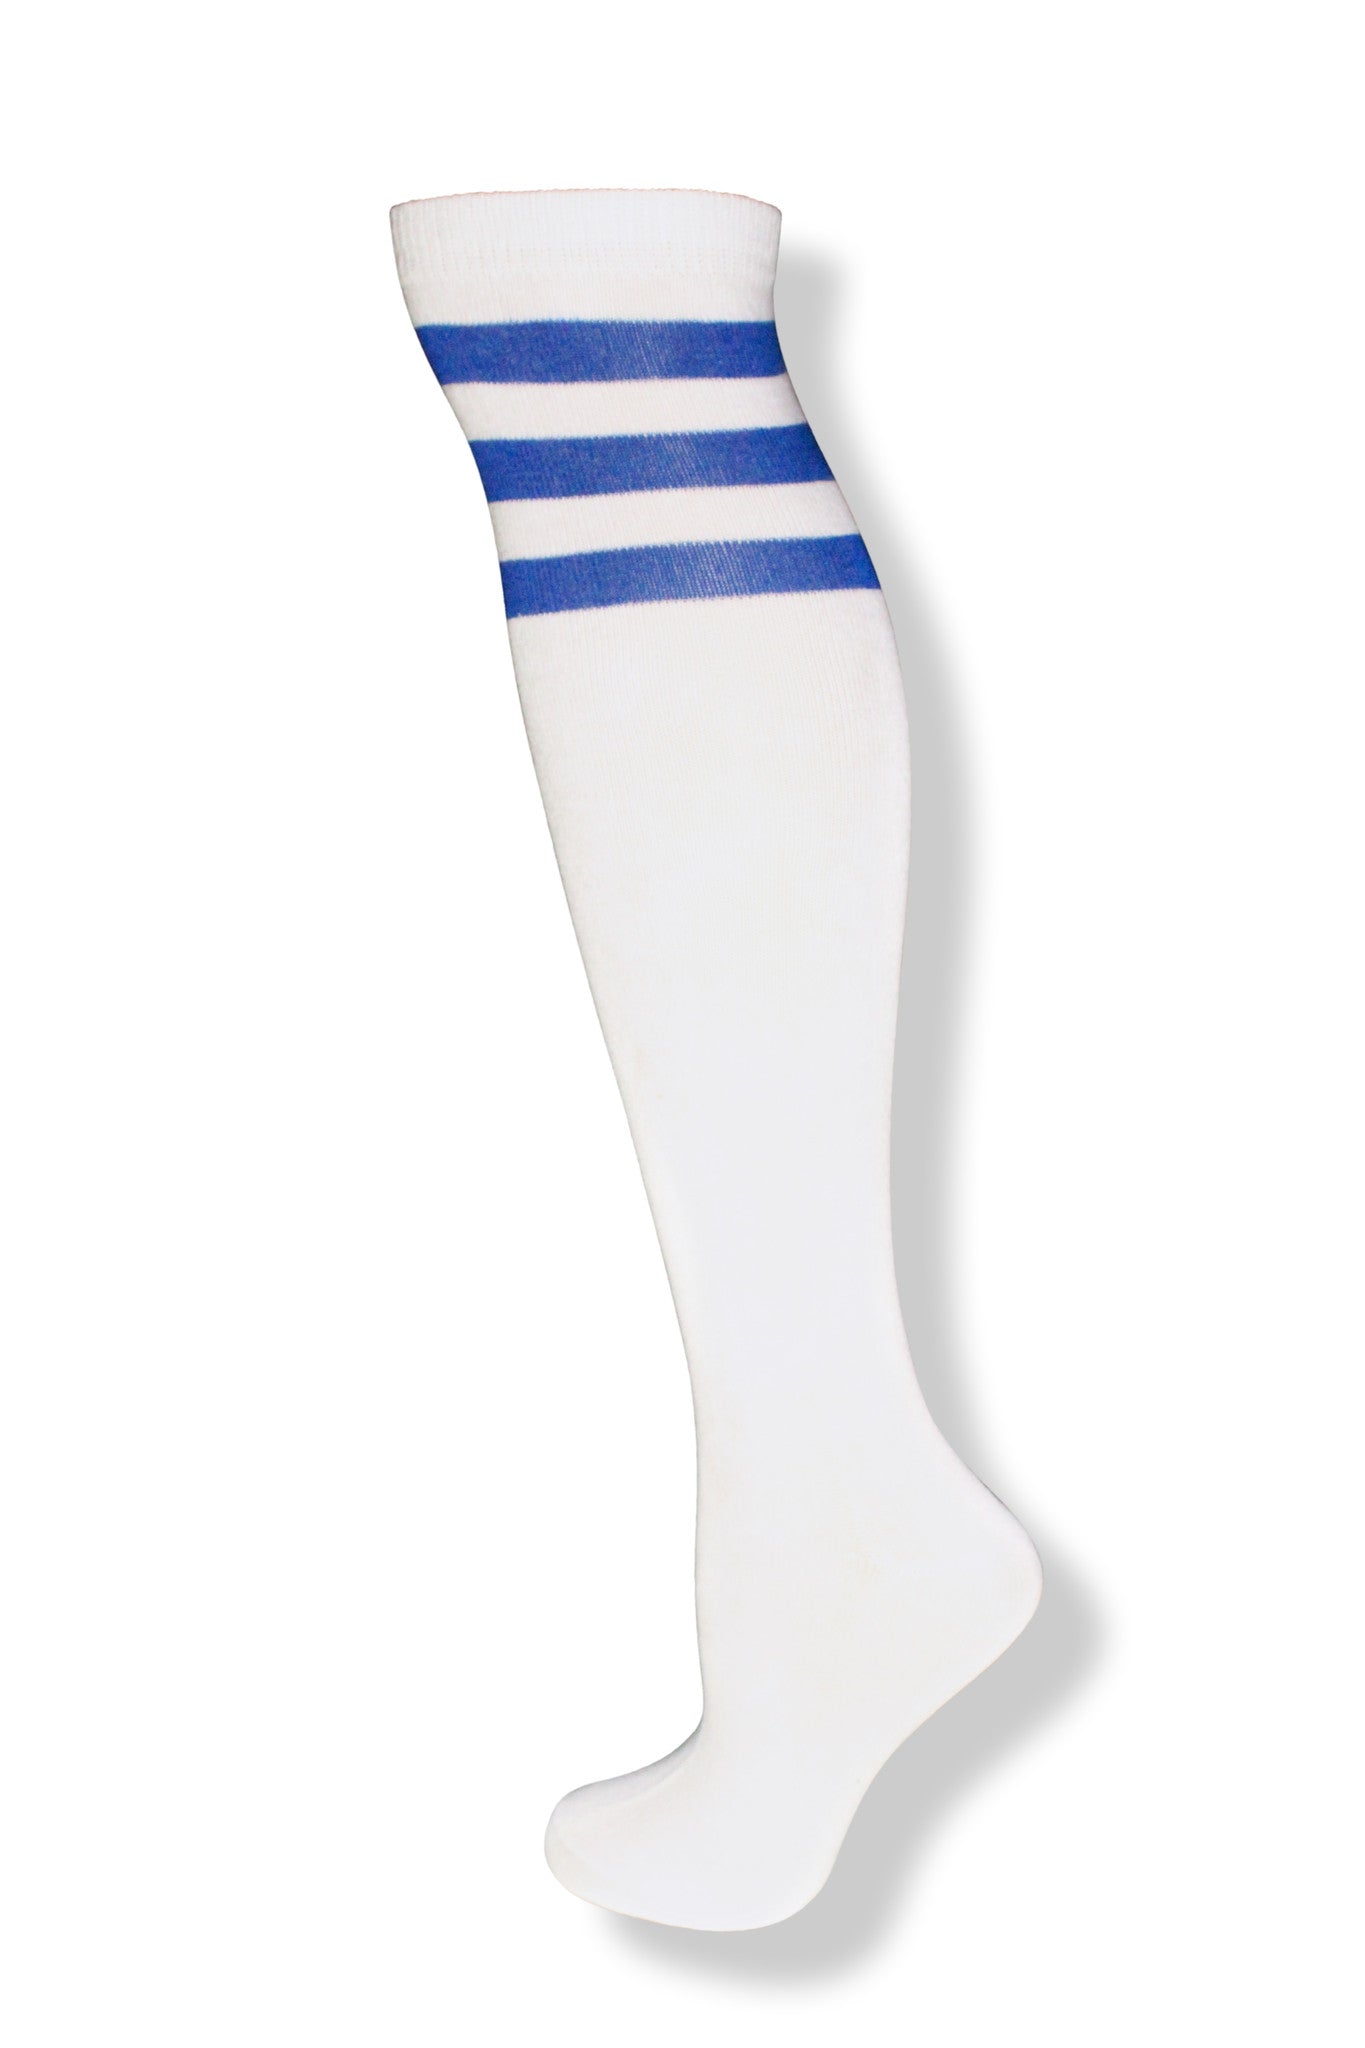 White with Royal Blue Stripes Knee High Sock